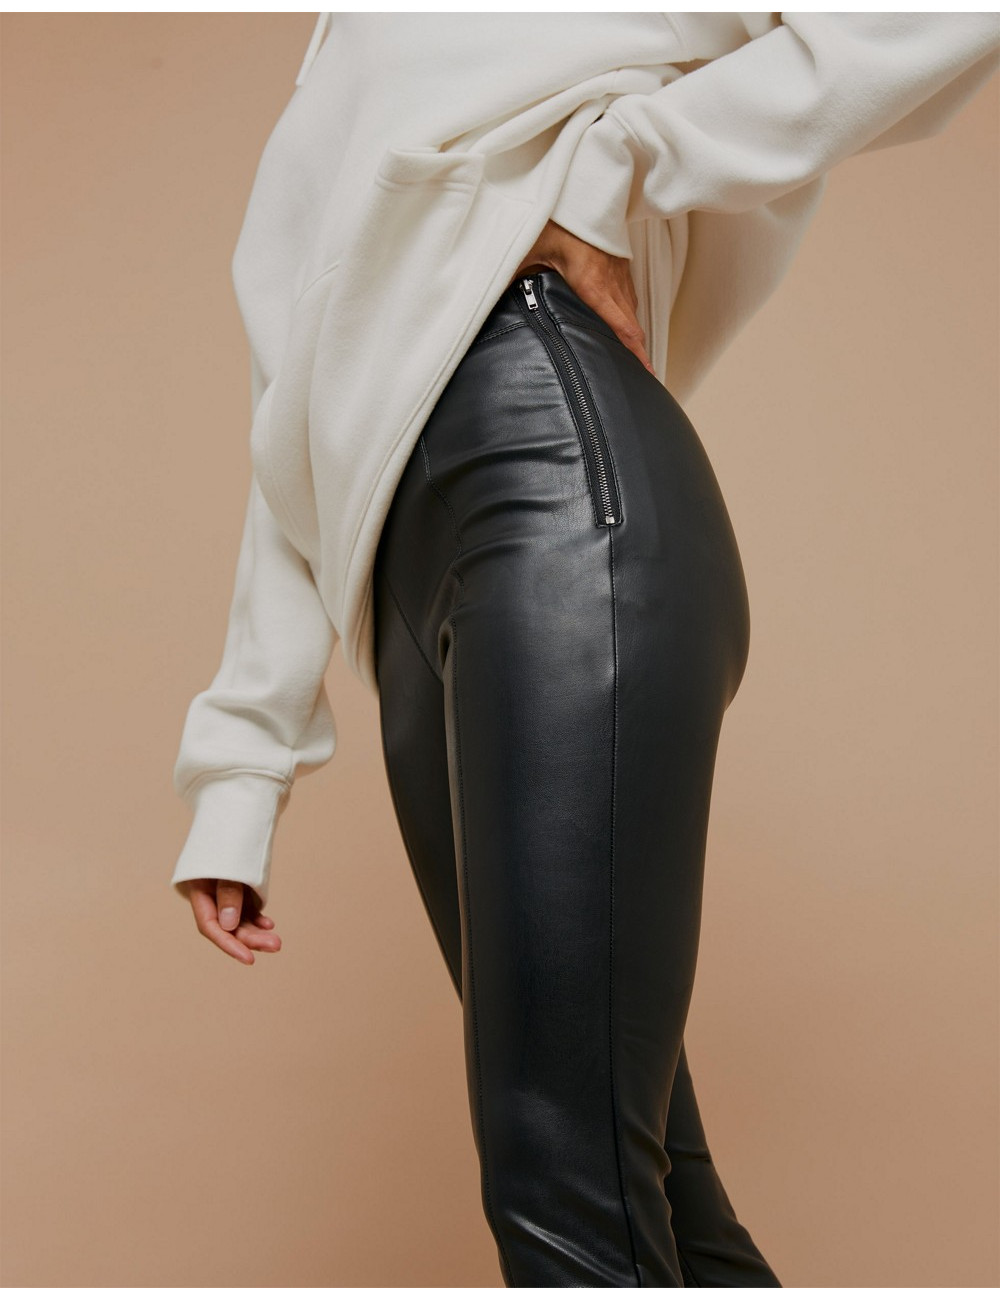 Topshop Tall faux leather...